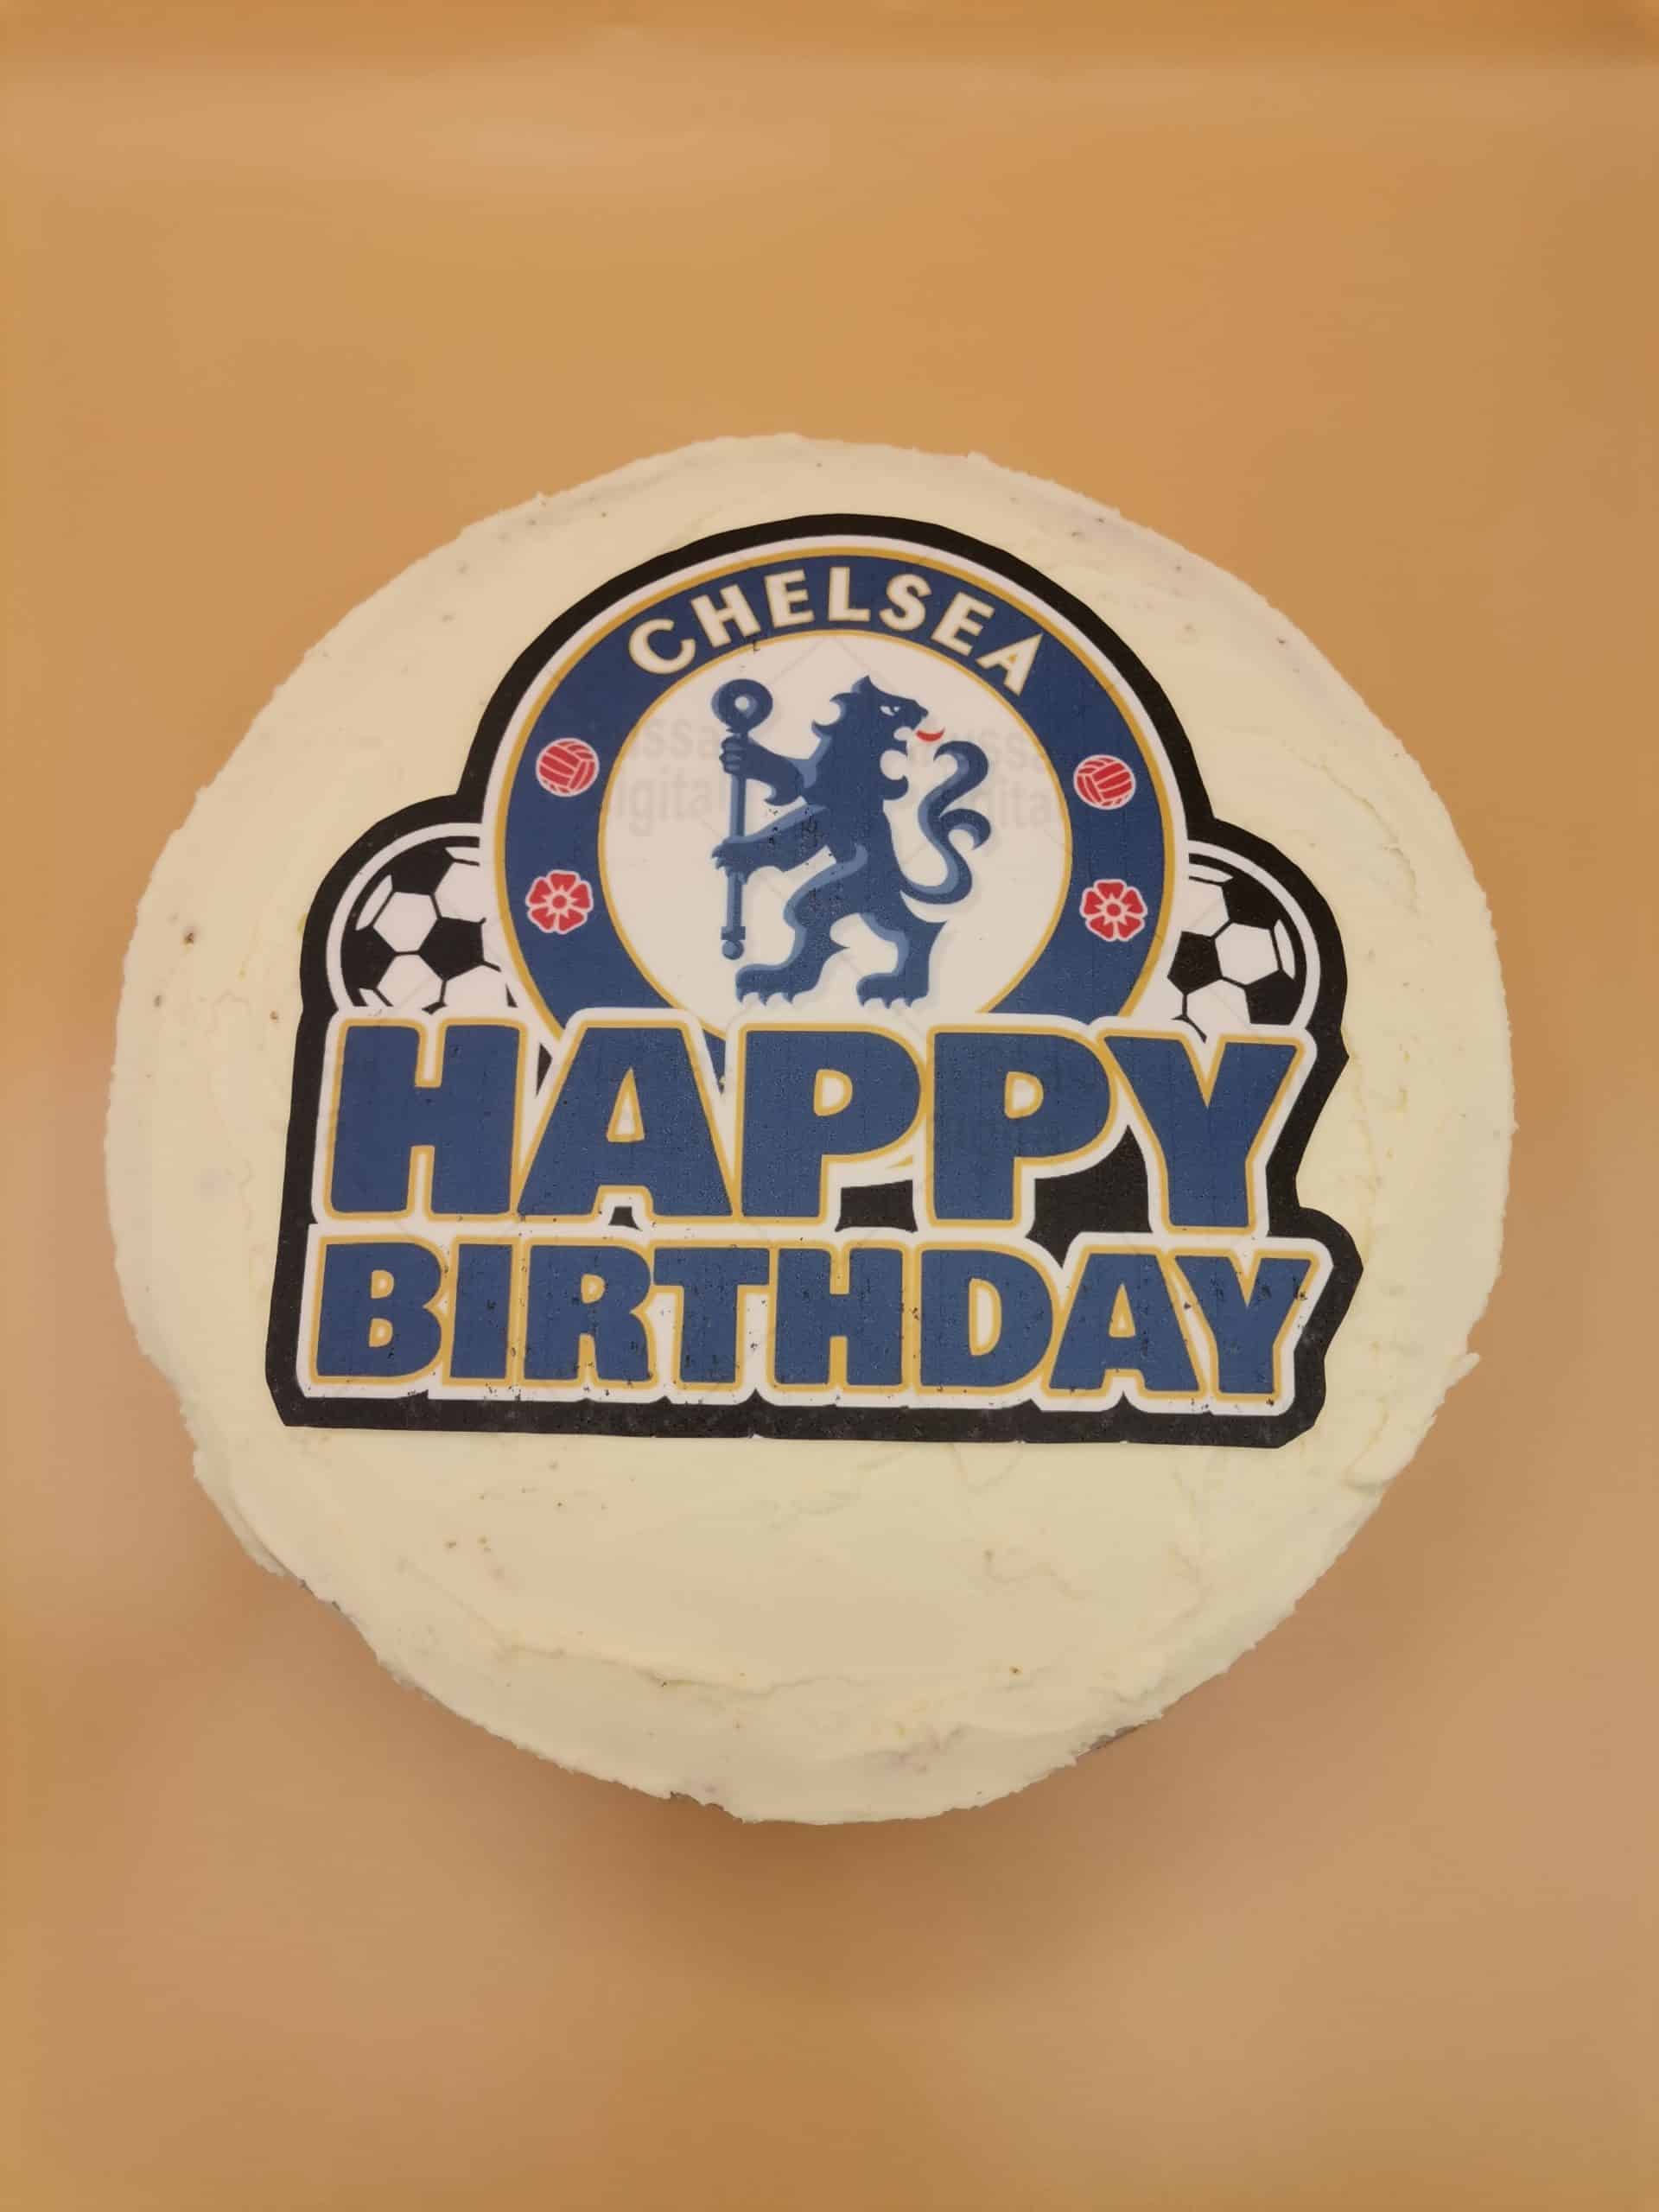 Chelsea Football Club Birthday Cake  Anges de Sucre